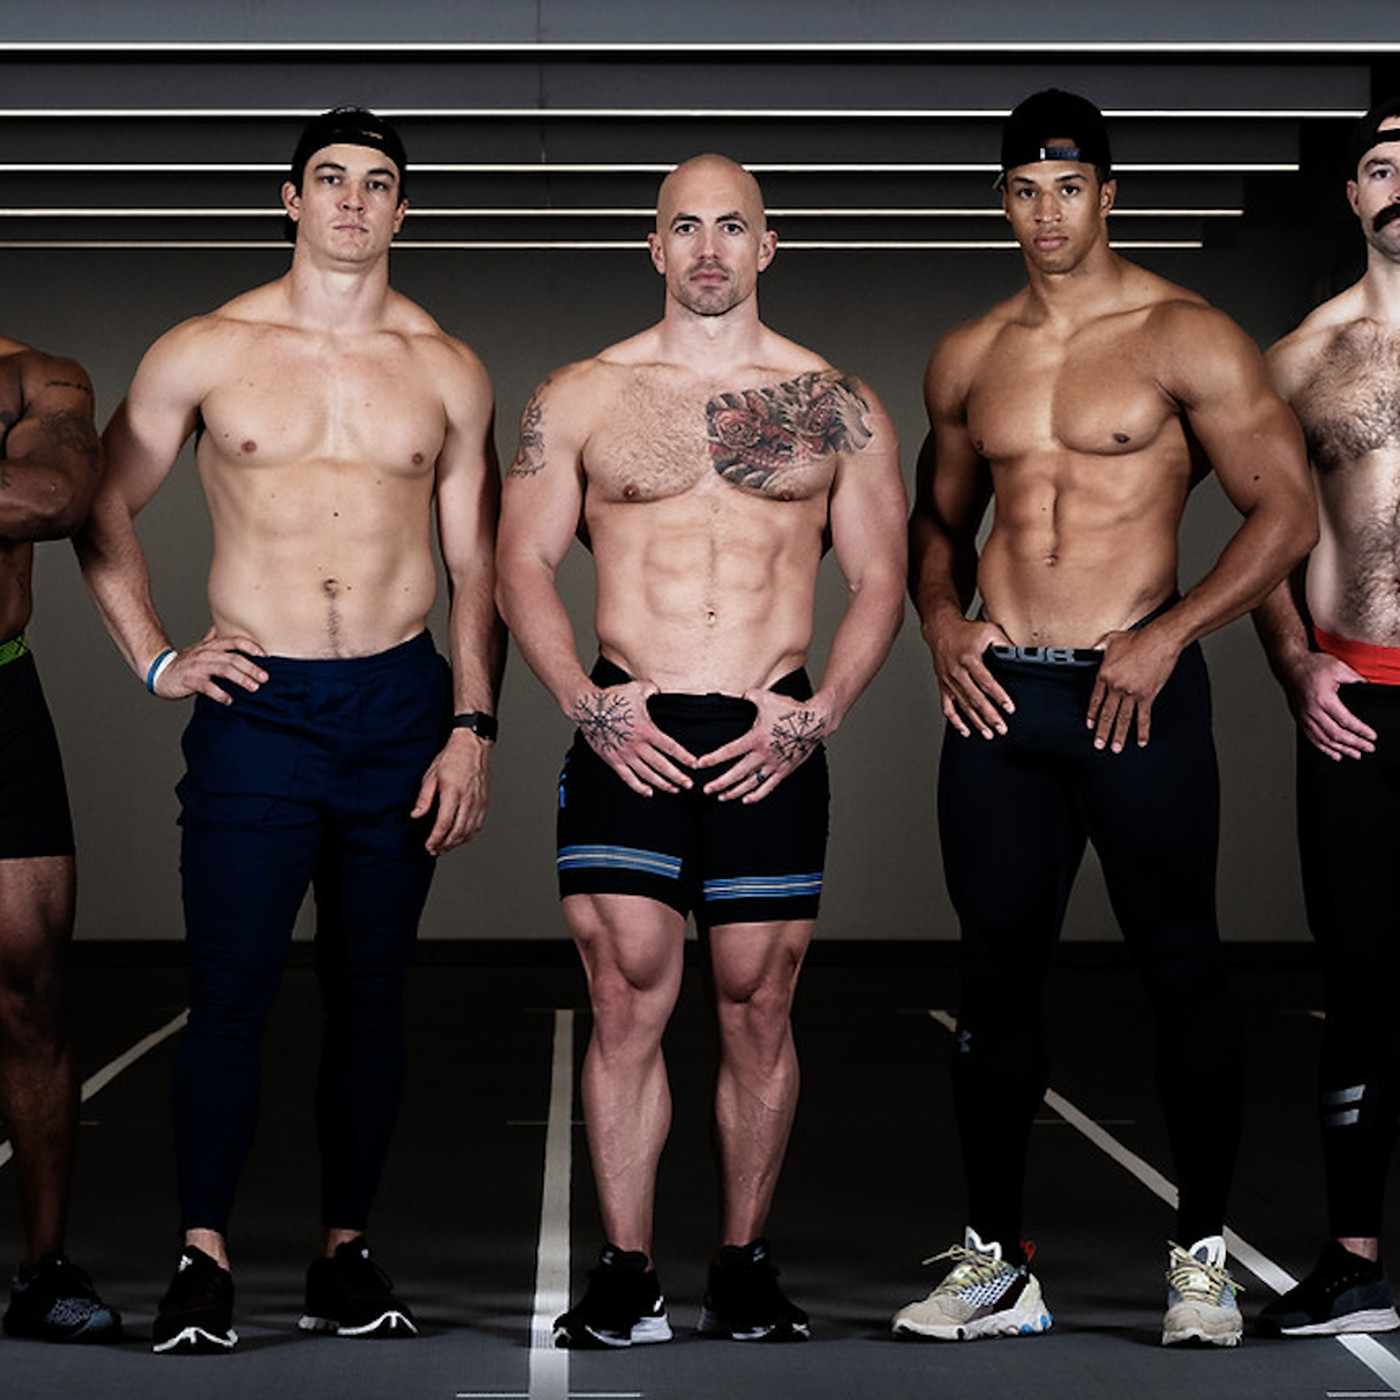 U.S. bobsled team made almost-nude calendar to pay for Olympics - Outsports